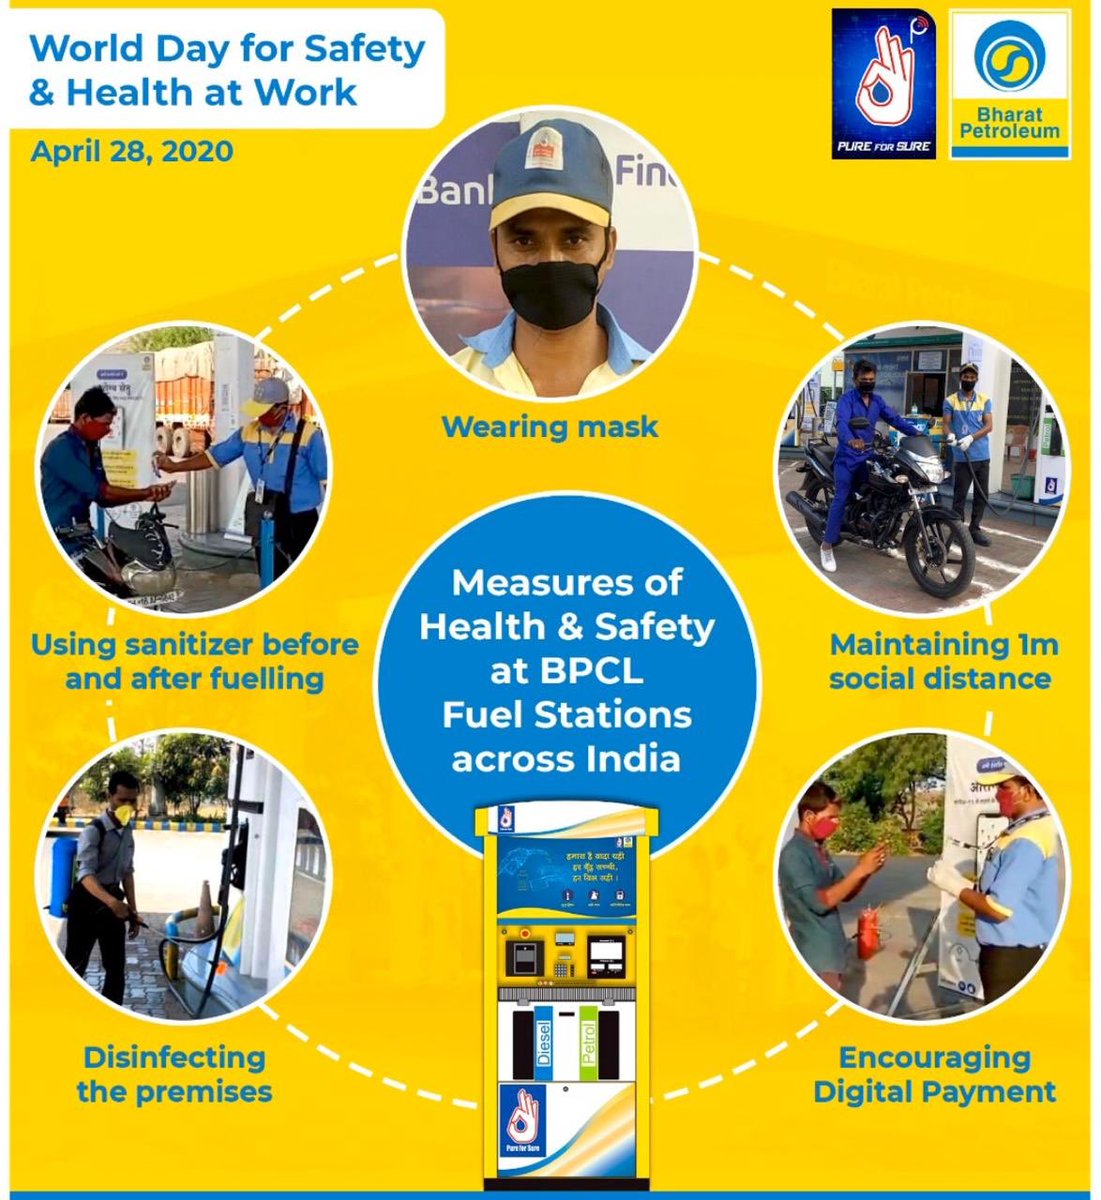 This #WorldDayForSafetyAndHealthAtWork, ensure our frontliner keep up the fight against Covid-19 & enable them with safety gears to protect themselves. Their tireless work & self-sacrifice to keep the nation moving show the best of humanity #BharatPetroleum @BPCLimited